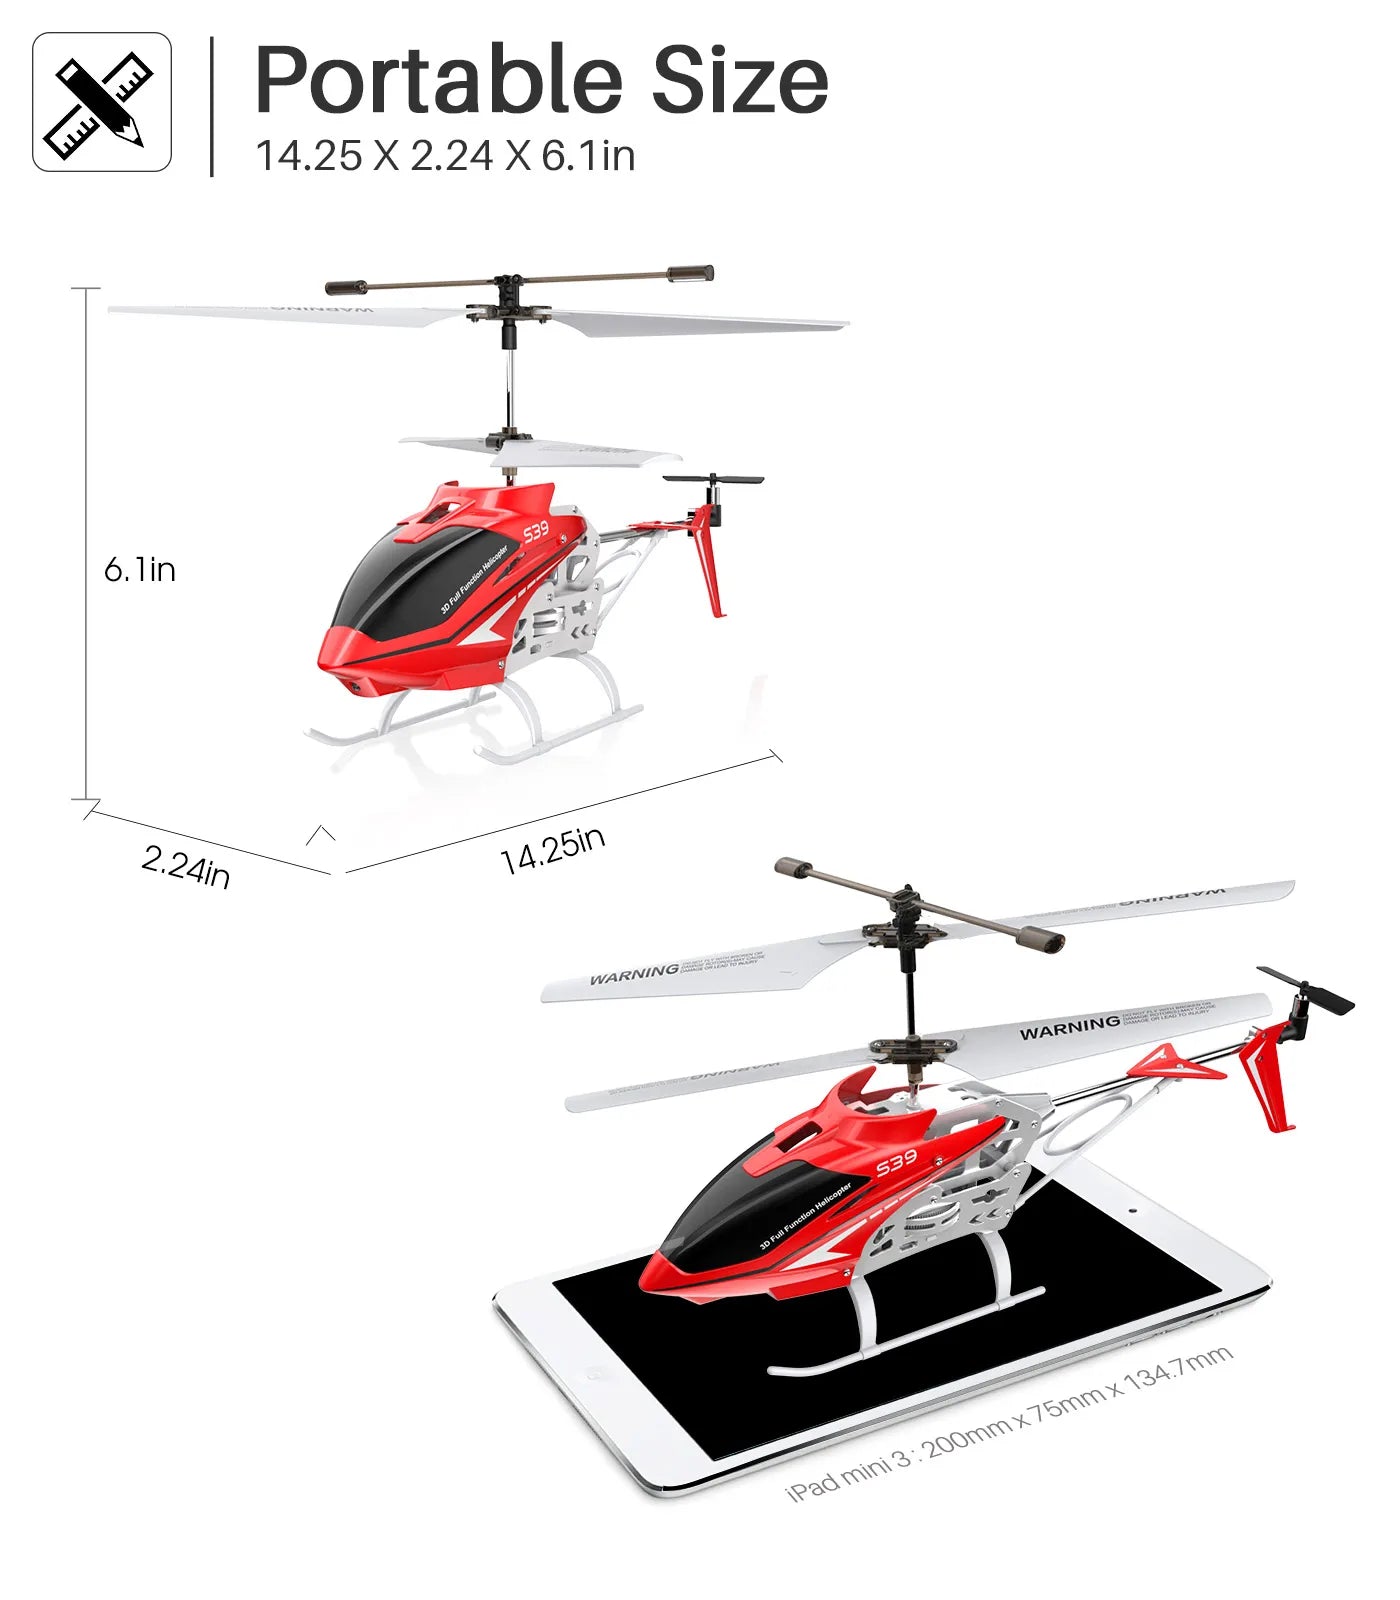 SYMA S39 RC Helicopter, Portable Size 14.25X2.24X6.1in 539 6,Iin 1 4.25in